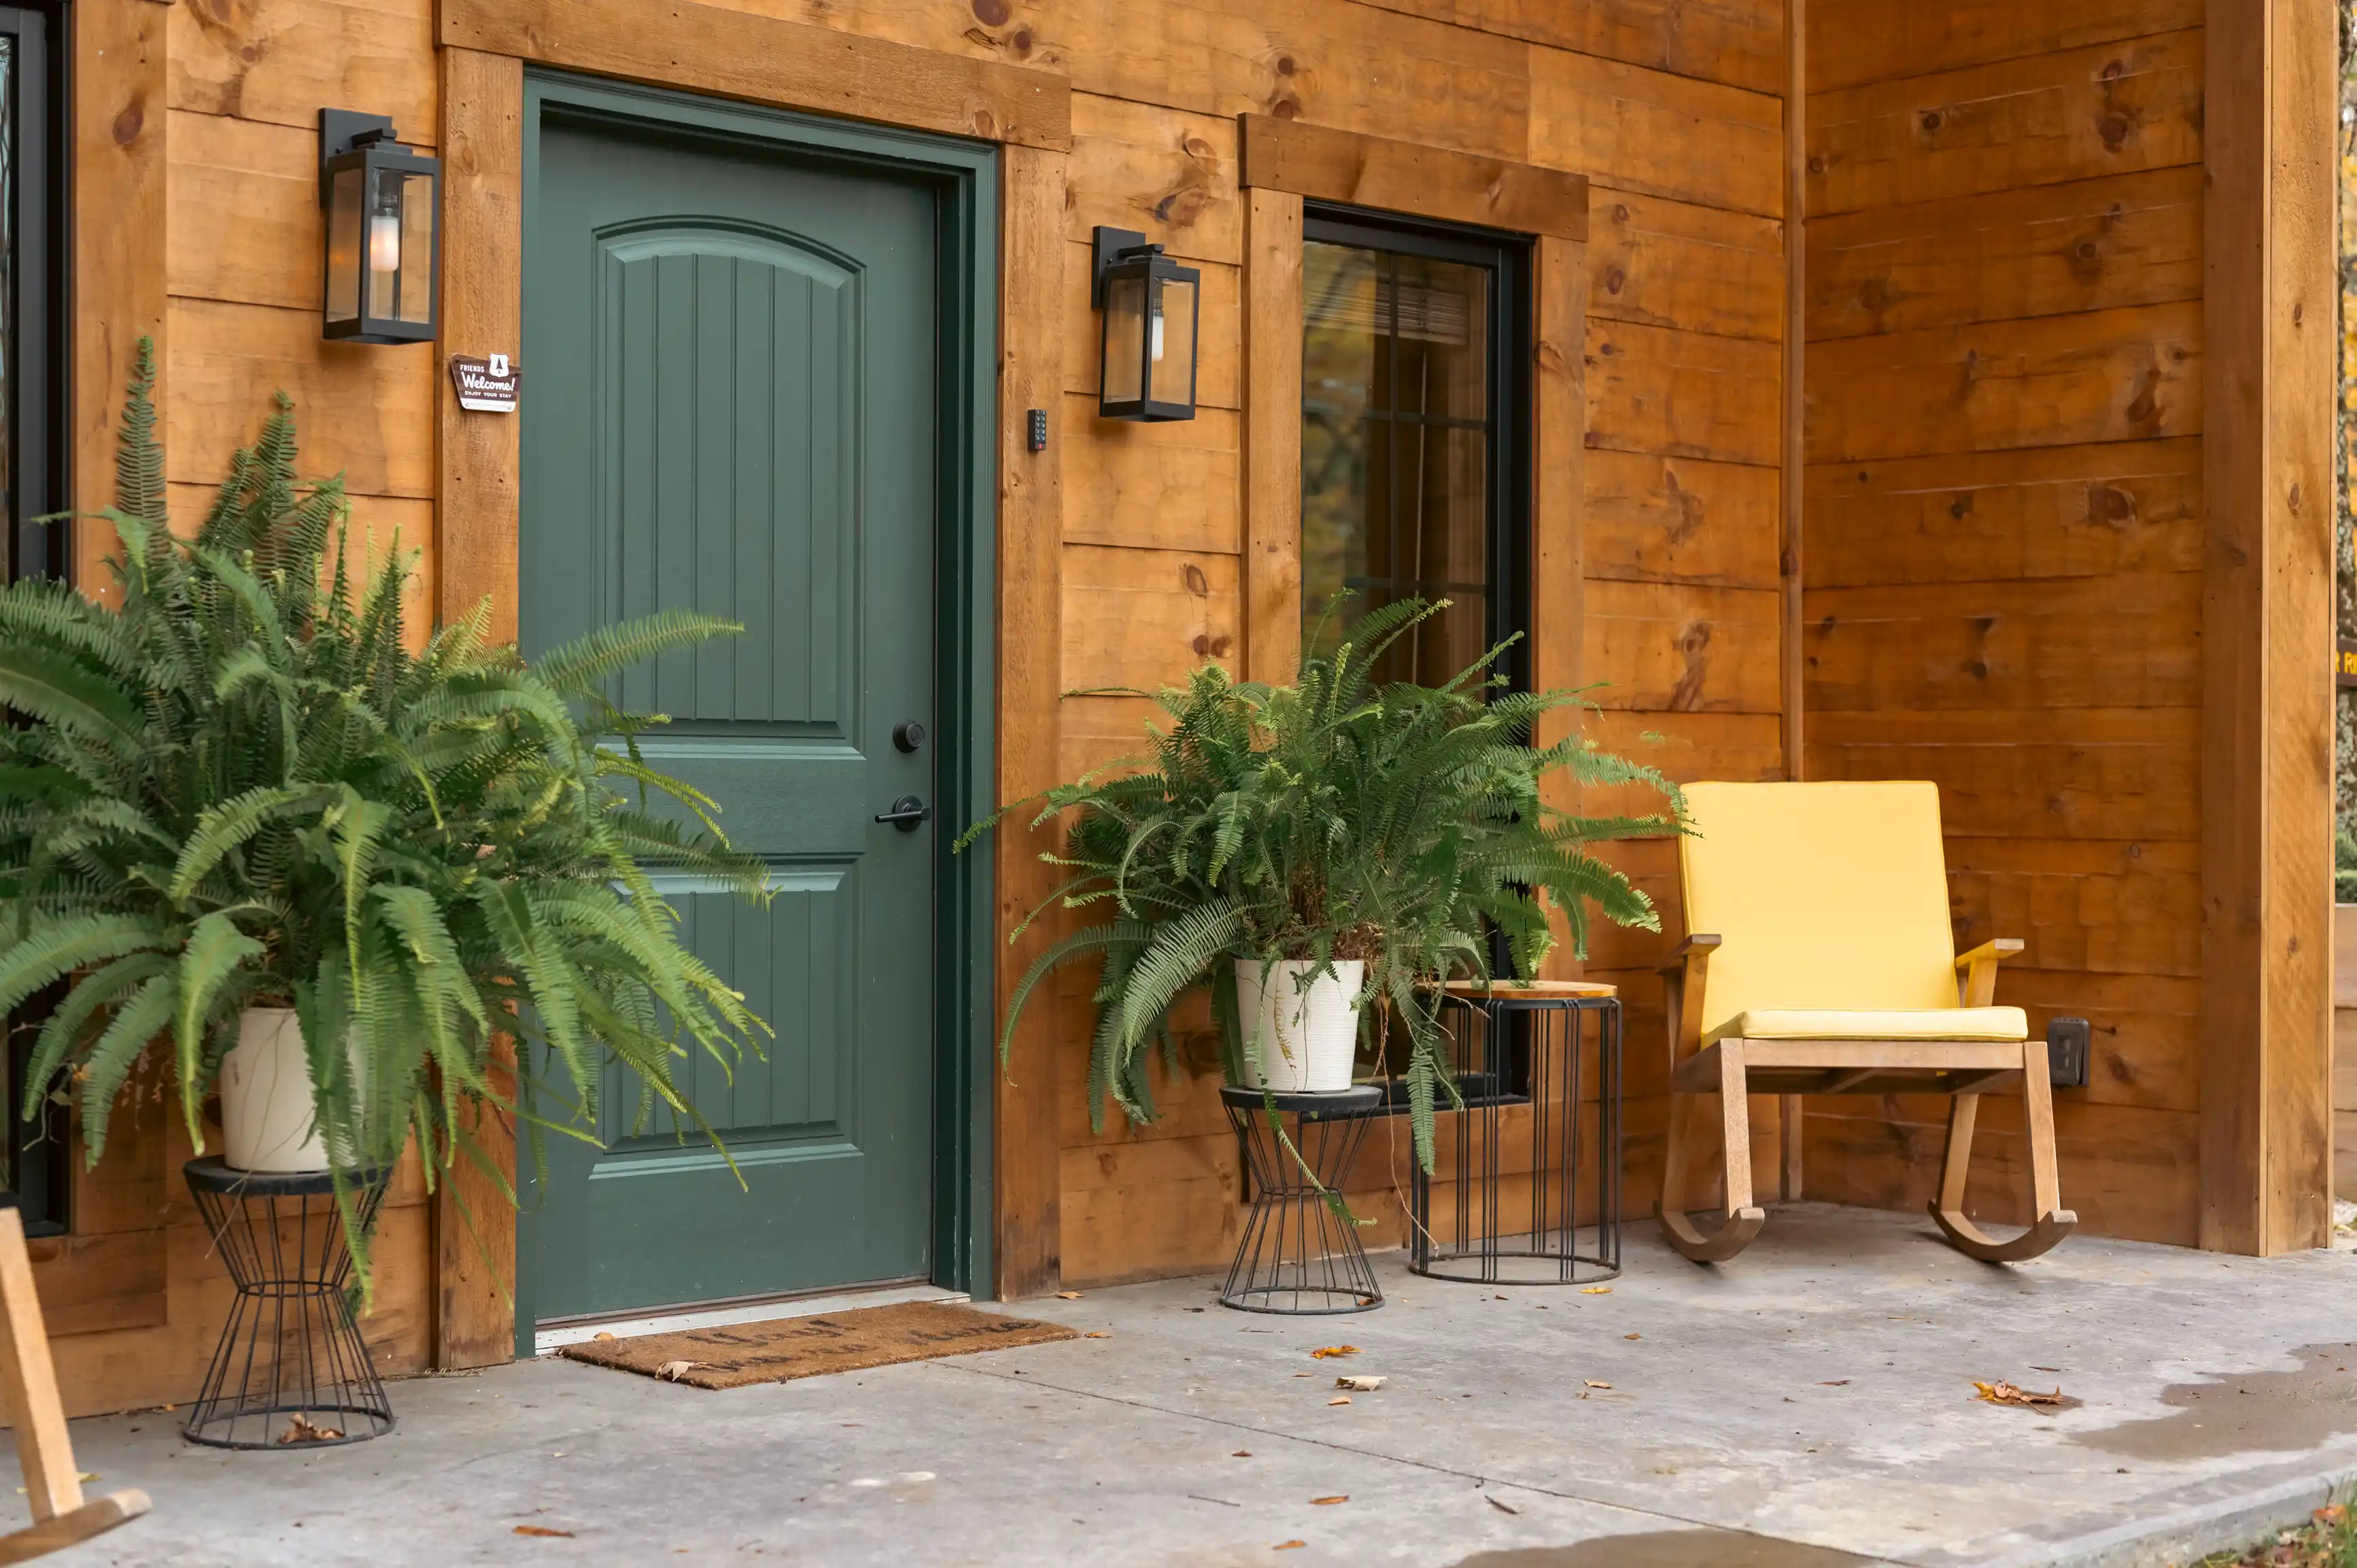 Cozy house entrance with a green door flanked by ferns and an inviting yellow chair on the porch.